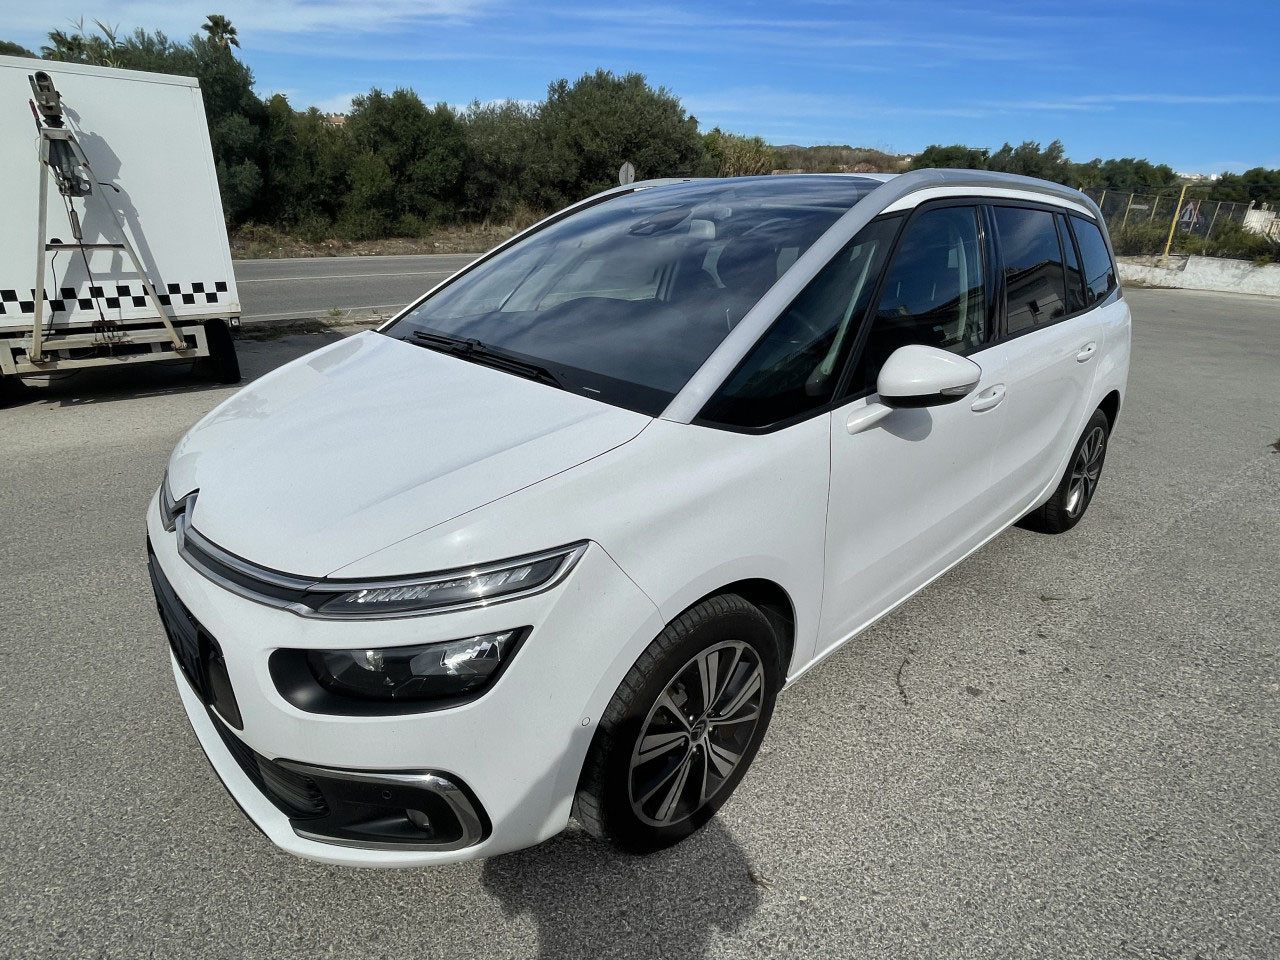 Citroen C4 Space Tourer 2.0 Hdi Automatic People carrier 2019 